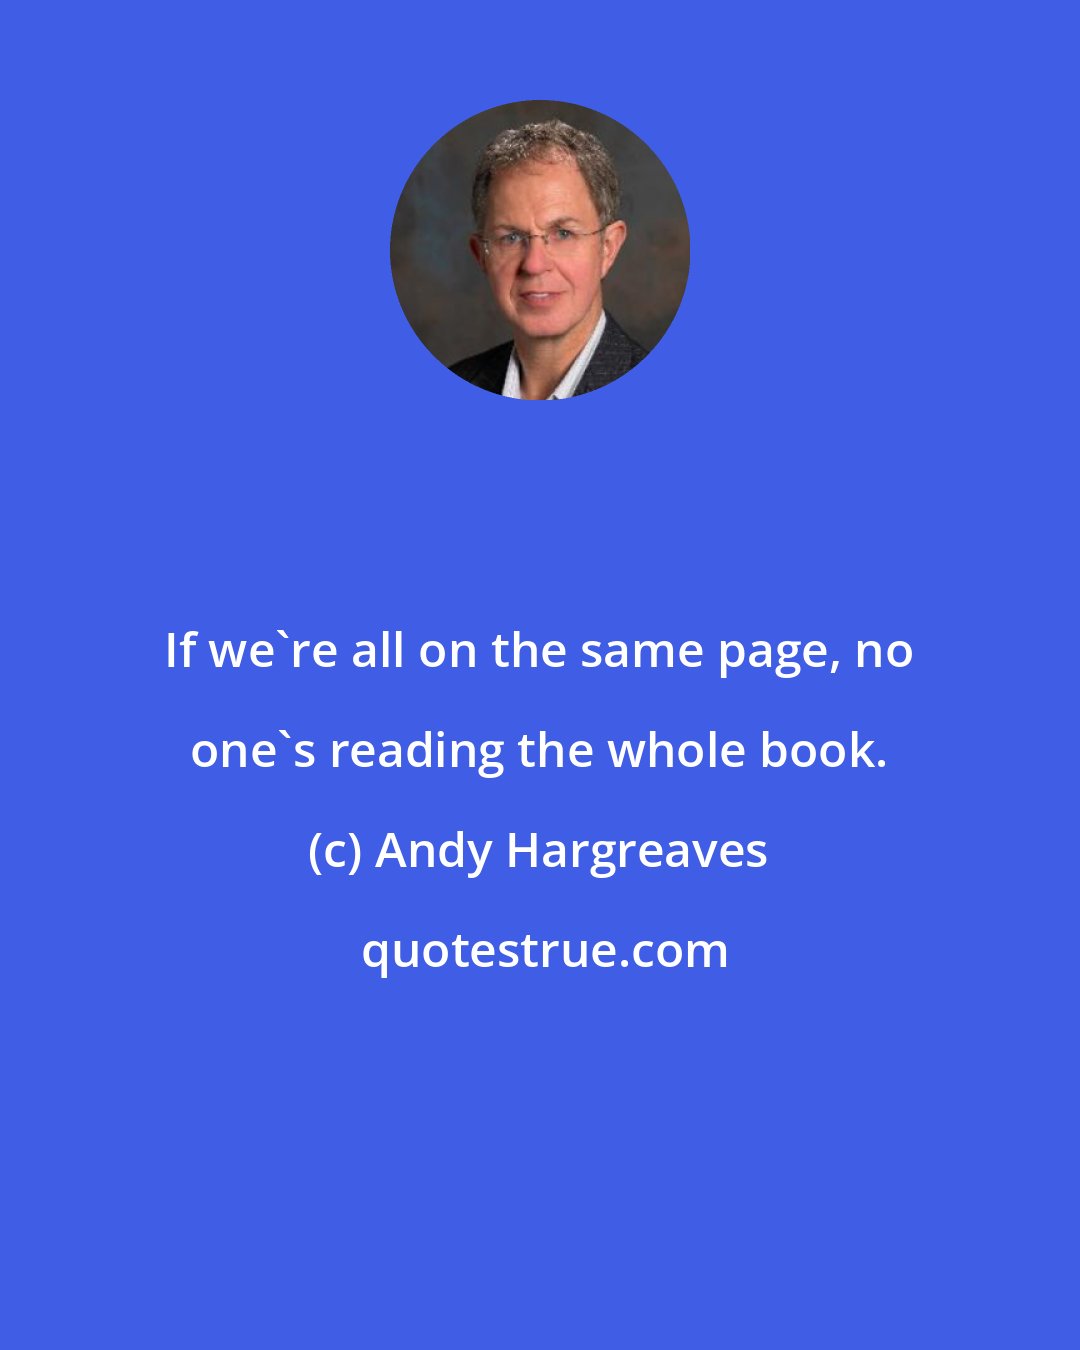 Andy Hargreaves: If we're all on the same page, no one's reading the whole book.